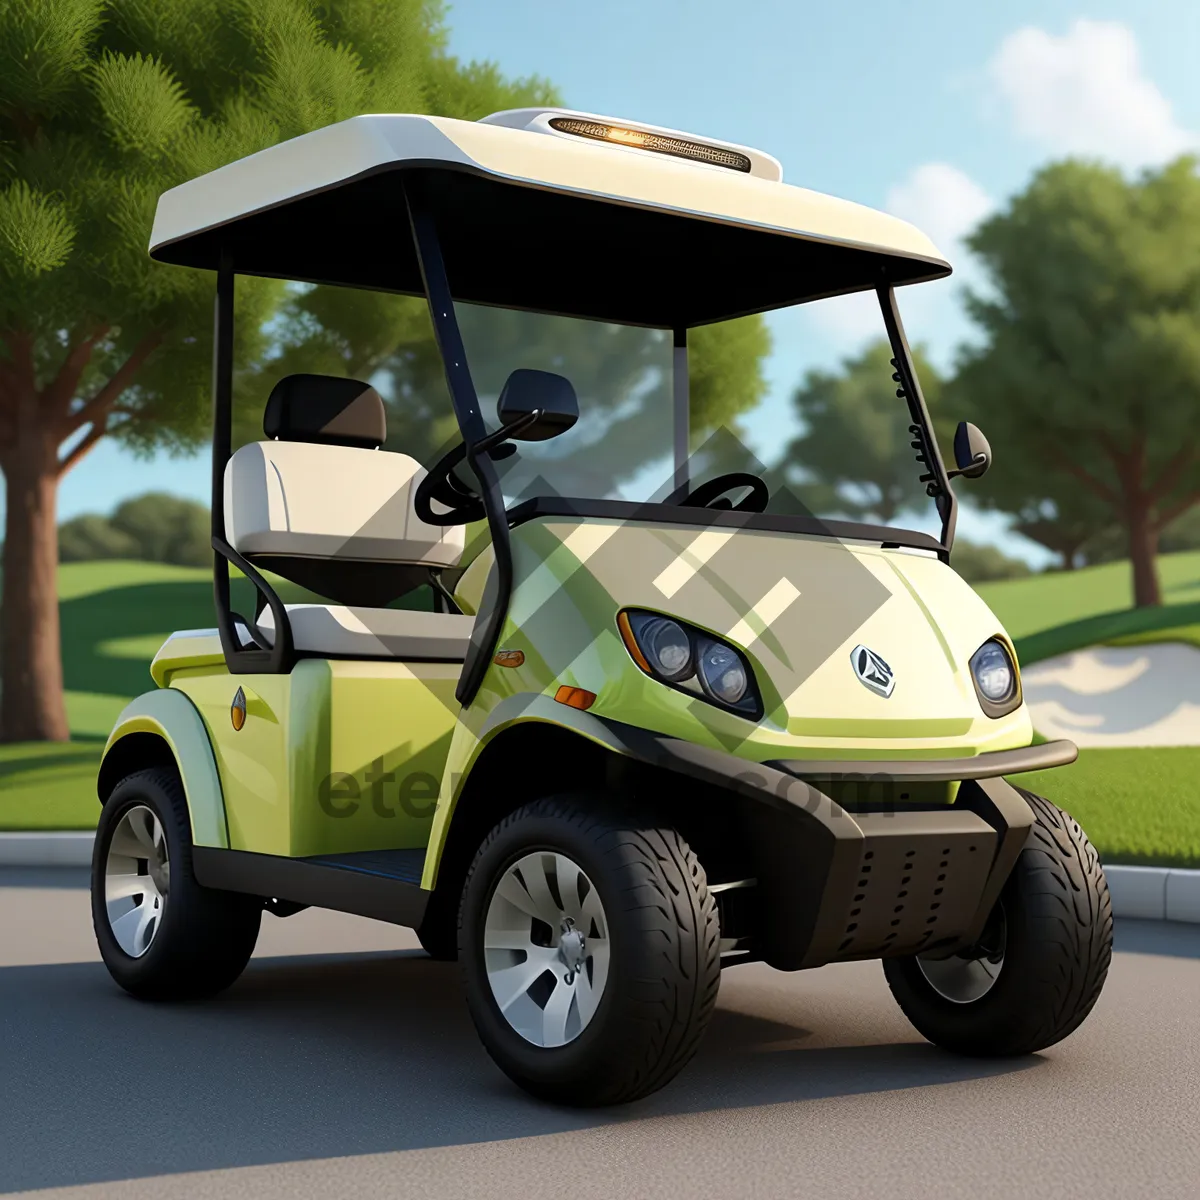 Picture of Sporty Golf Cart on Outdoor Course